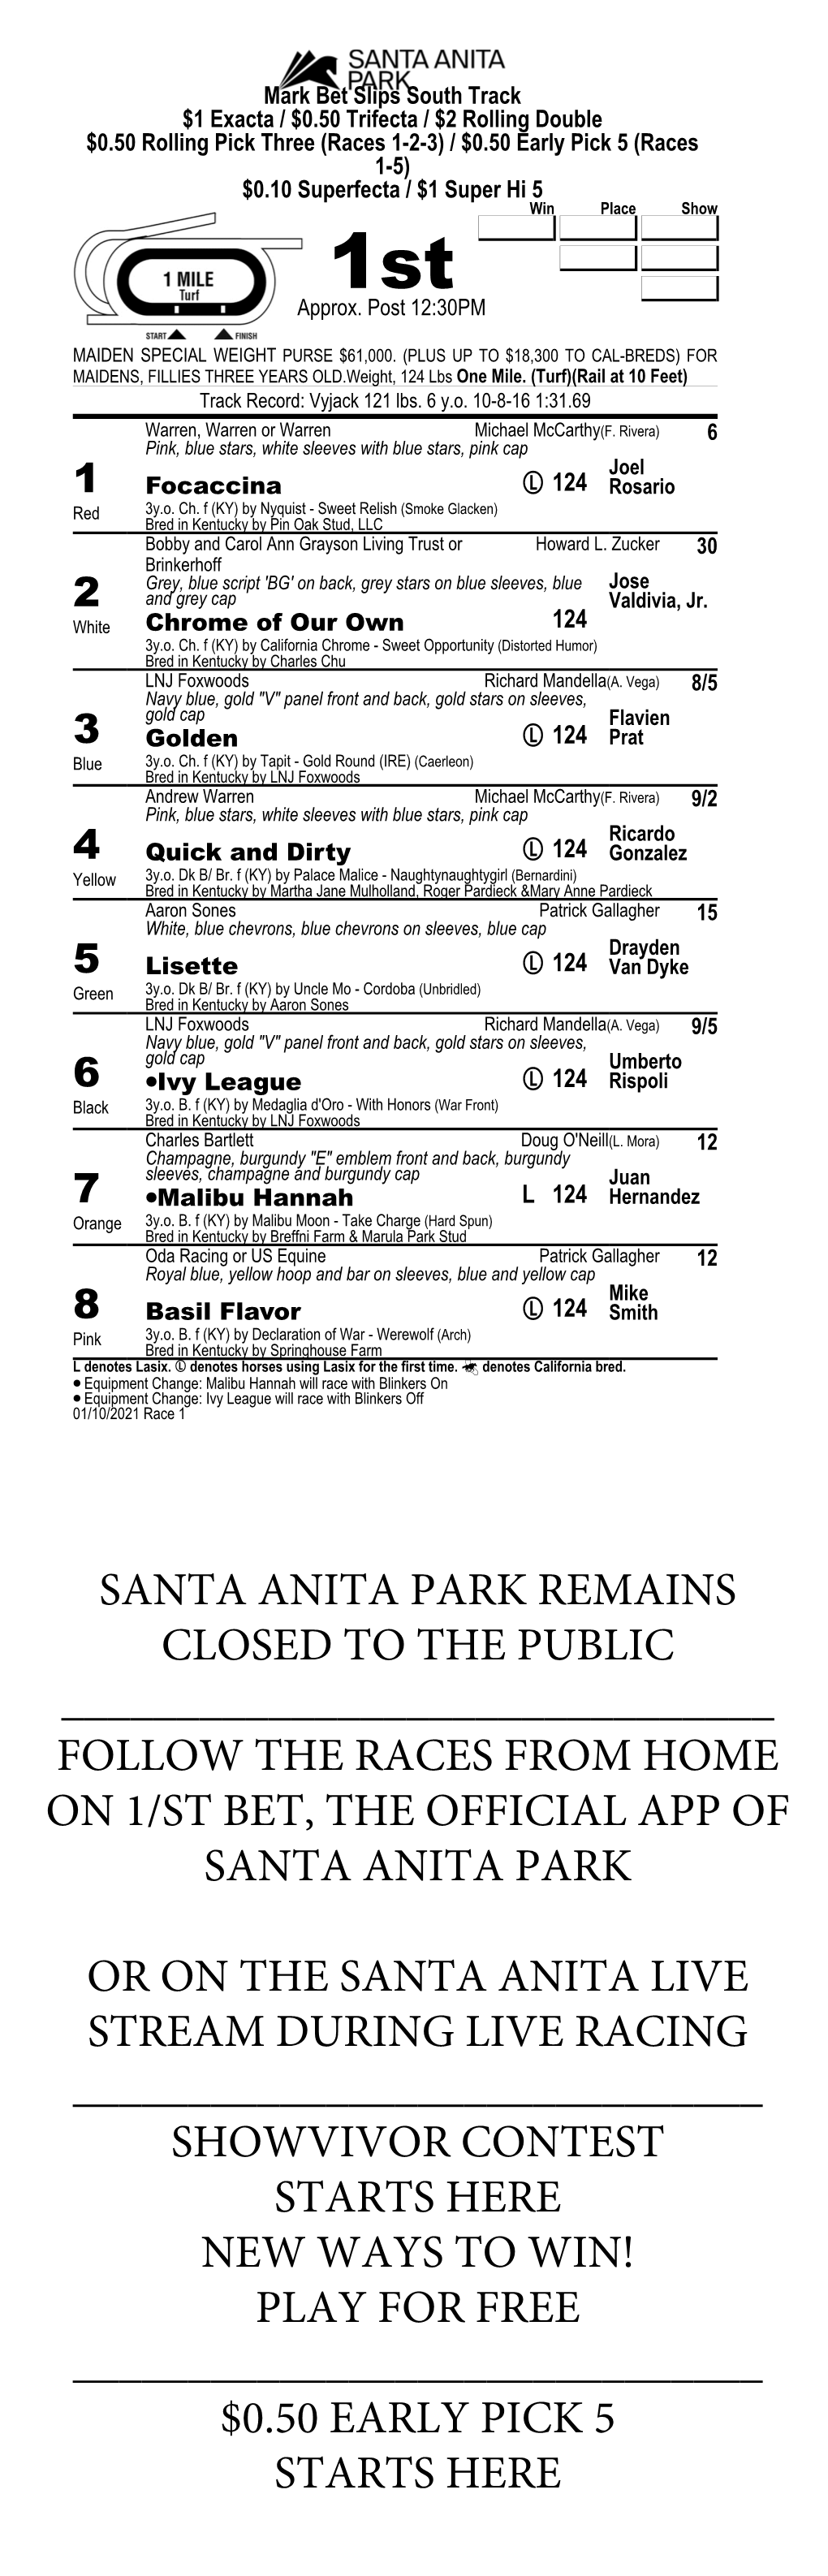 Follow the Races from Home on 1/St Bet, the Official App of Santa Anita Park